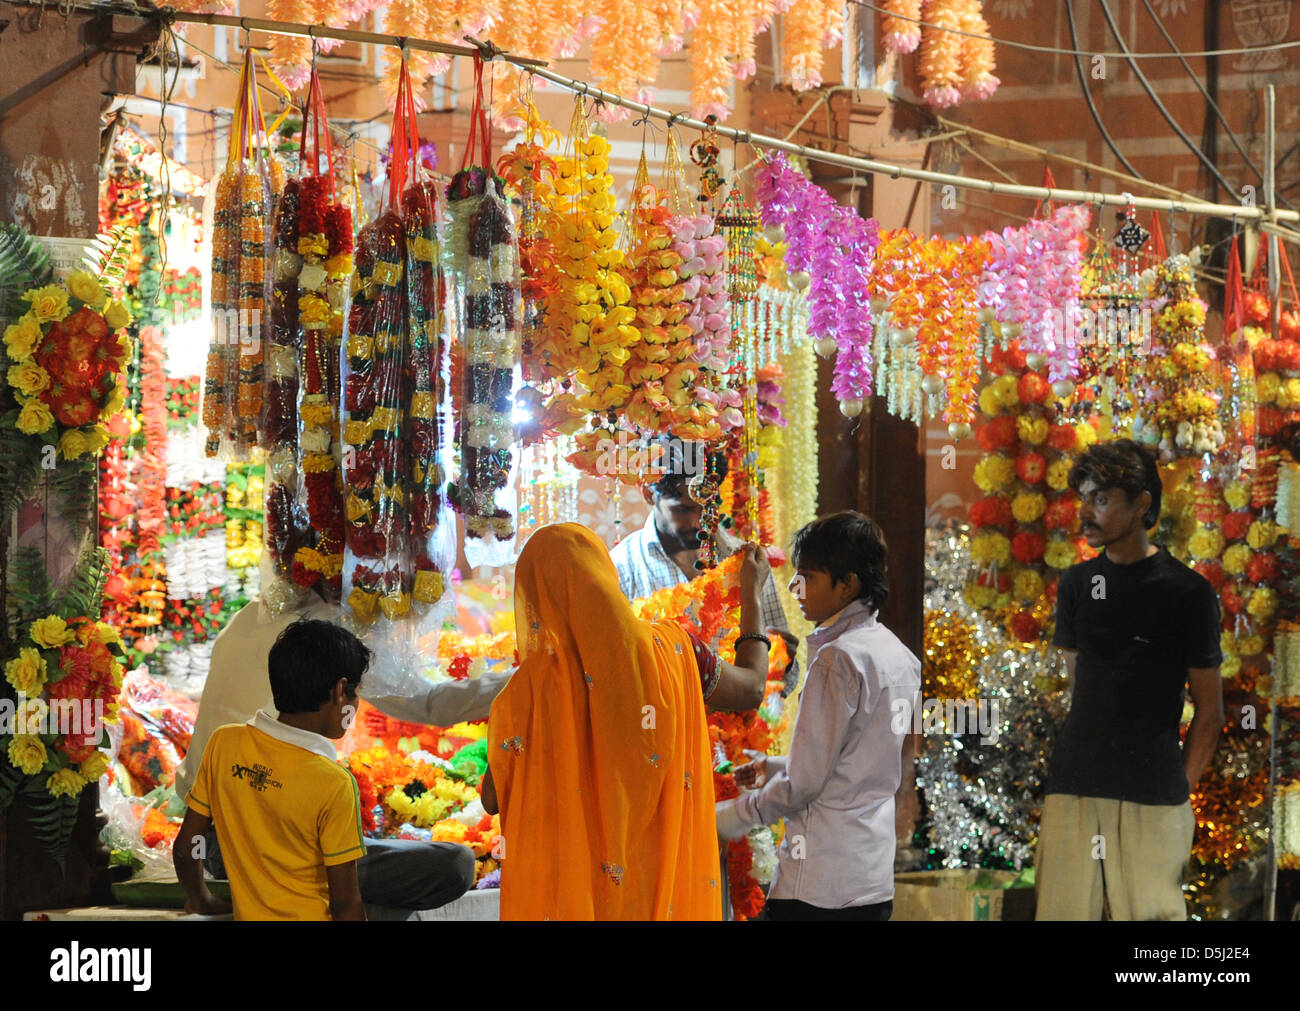 Flower girlands are sold on the street prior to the hindu celebration of Divalia in Jaipur, Germany, 12 November 2012. The festival of lights will last several days and involve fireworks. Families get together and cook. Before, they buy new clothes, jewellery and cooking gear. Photo: JENS KALAENE Stock Photo